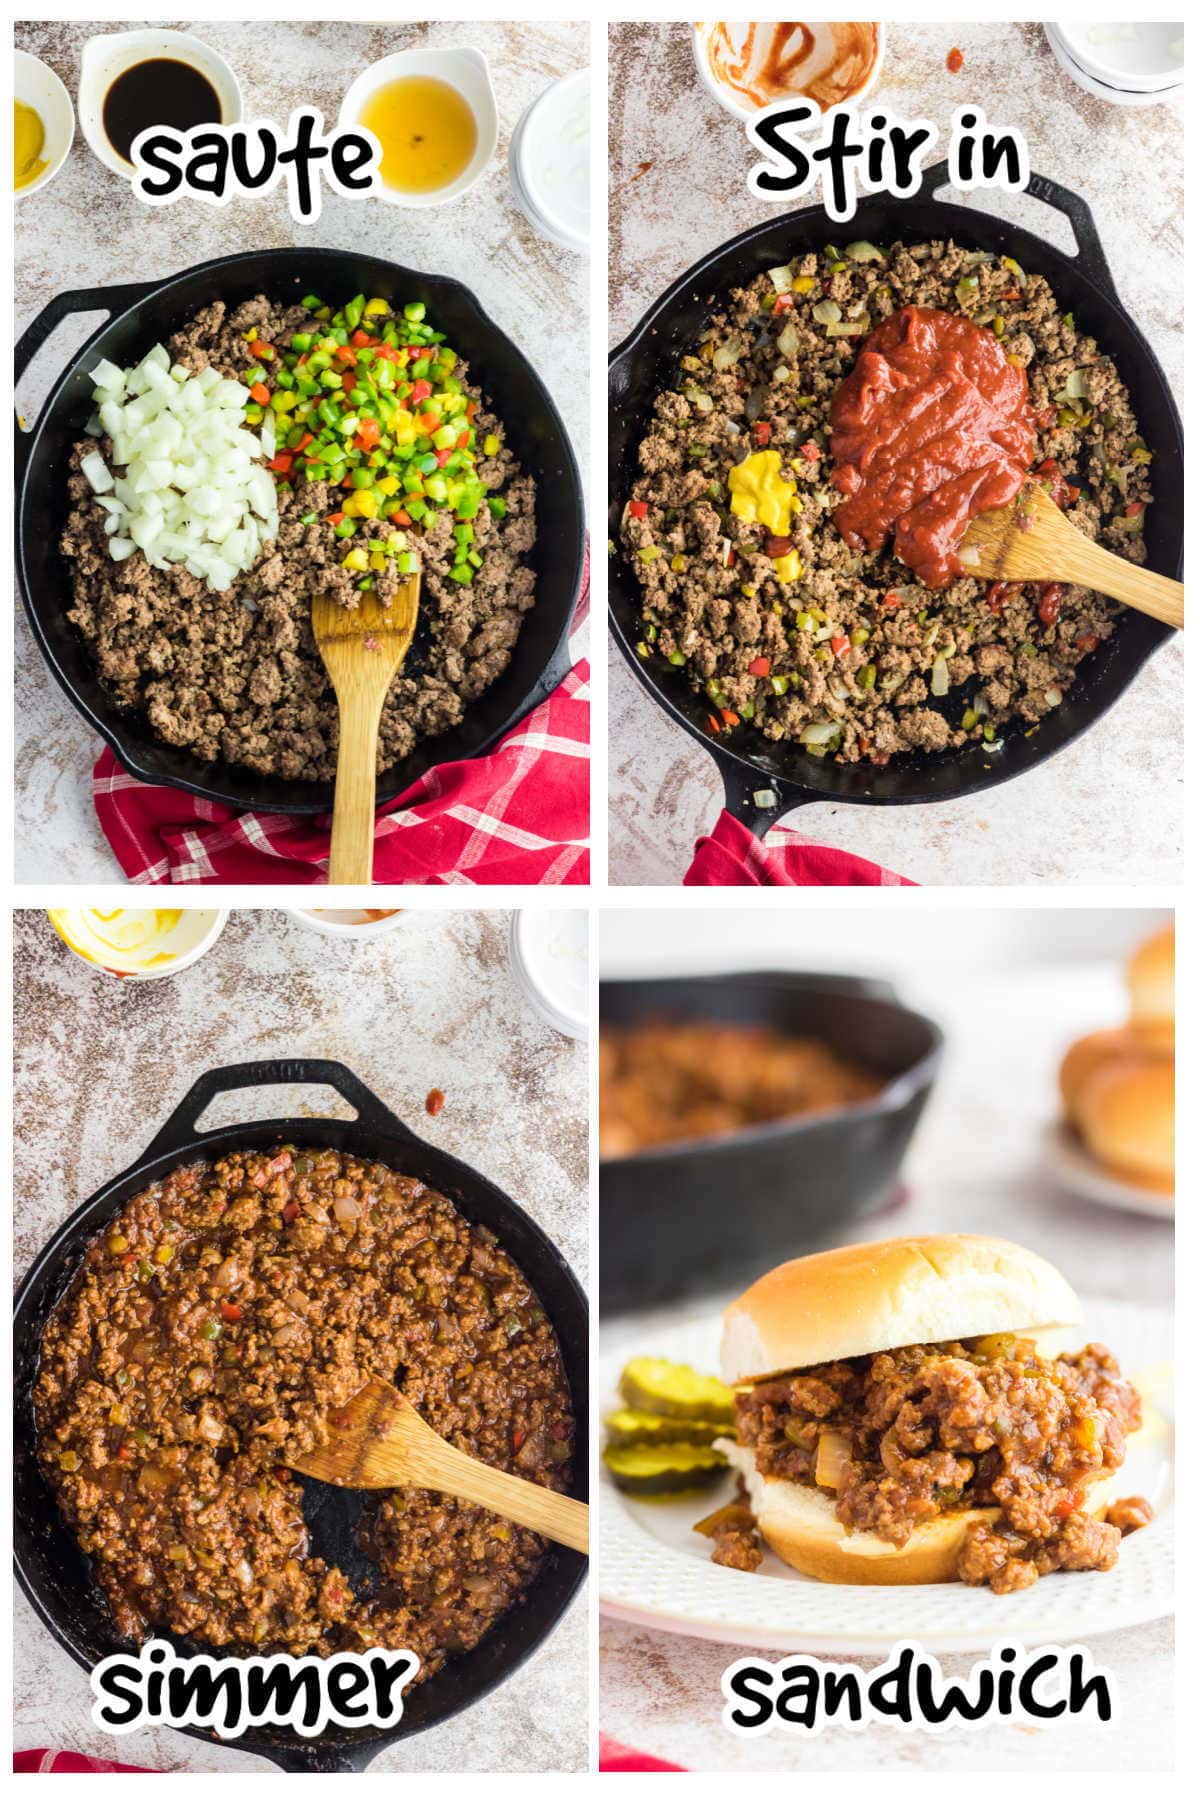 Step by step images for making sloppy joes.